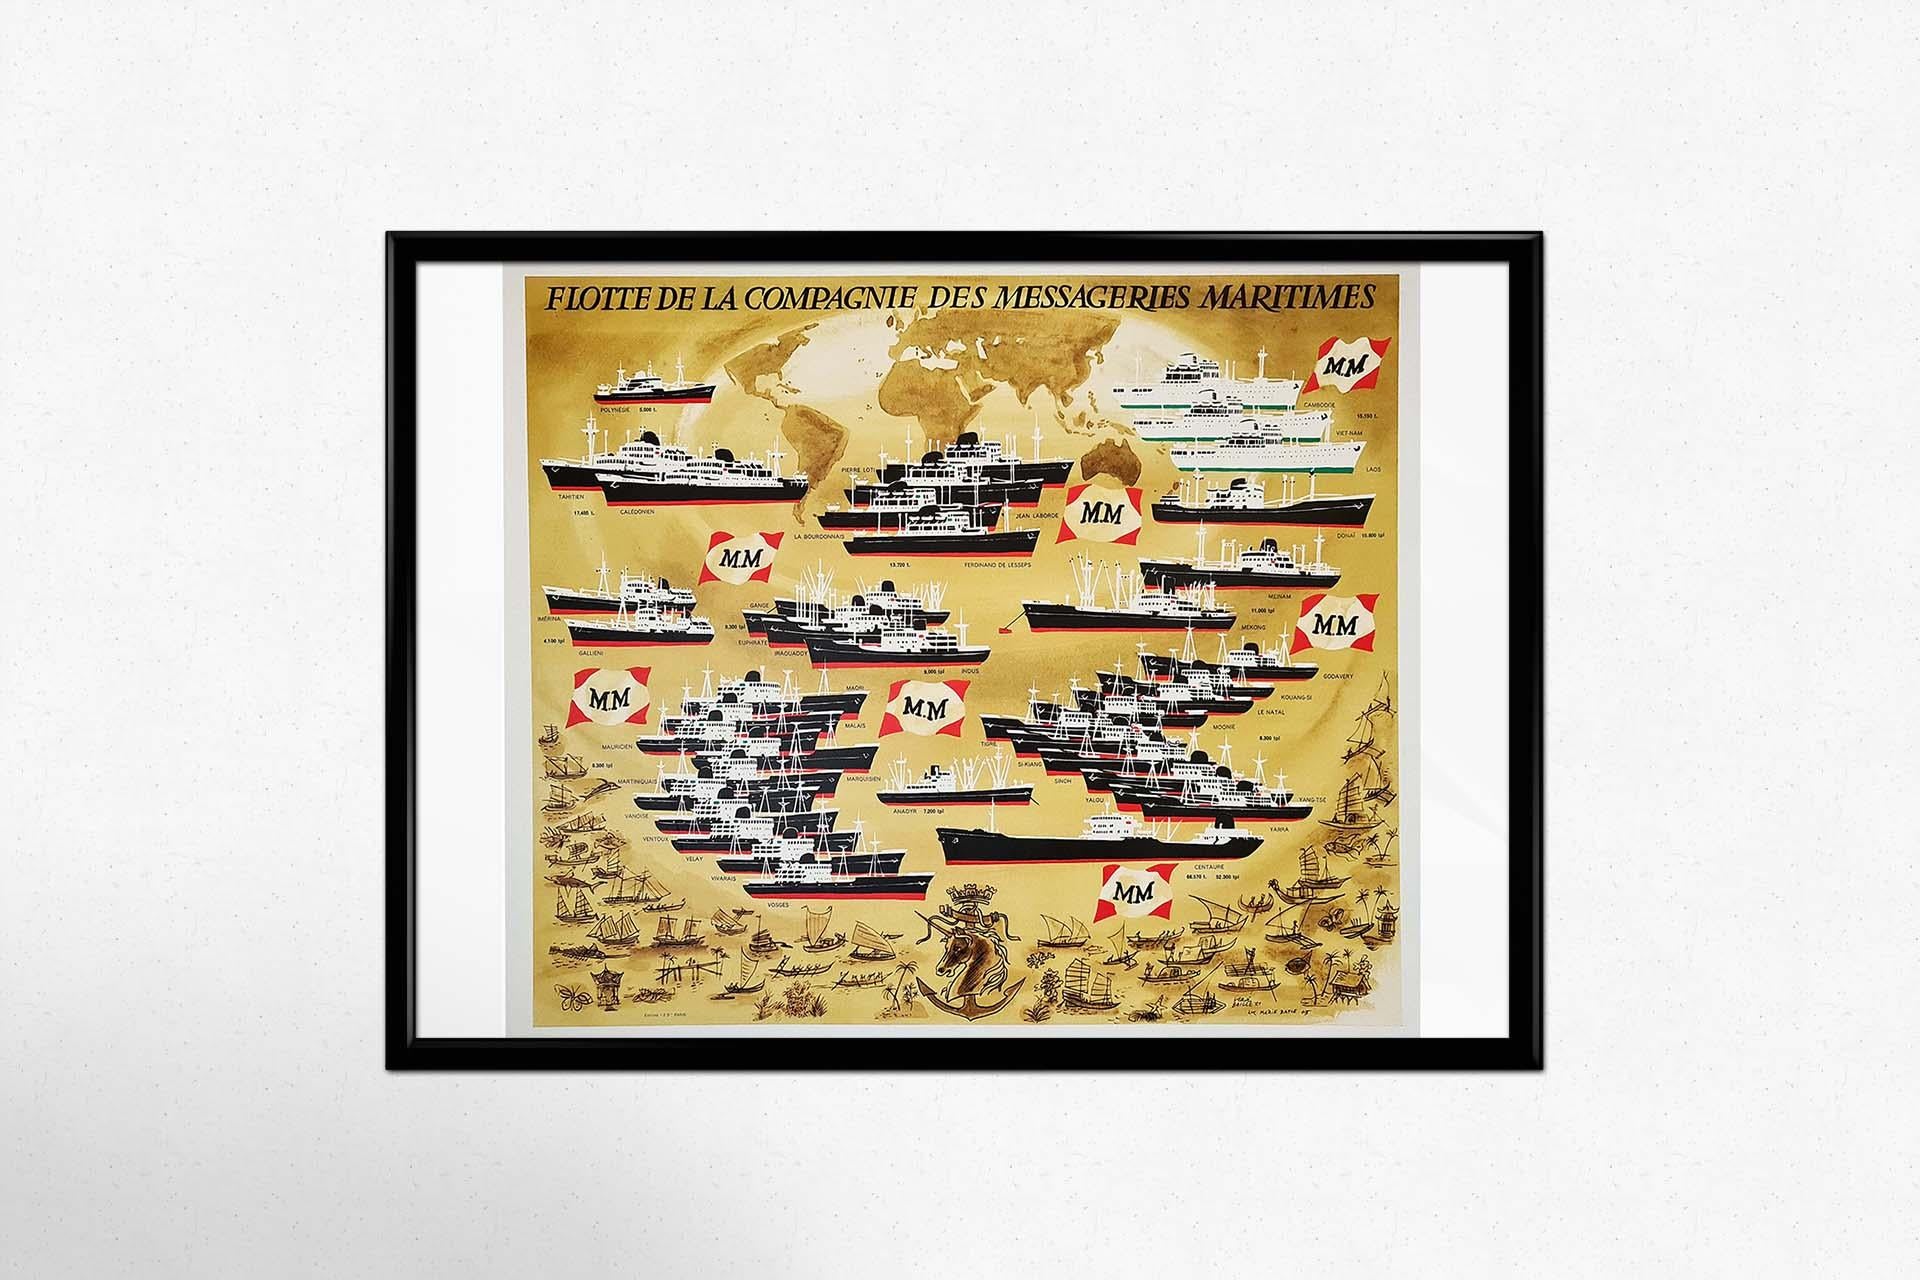 Circa 1950 original poster representing the fleet of the maritime messengers For Sale 1